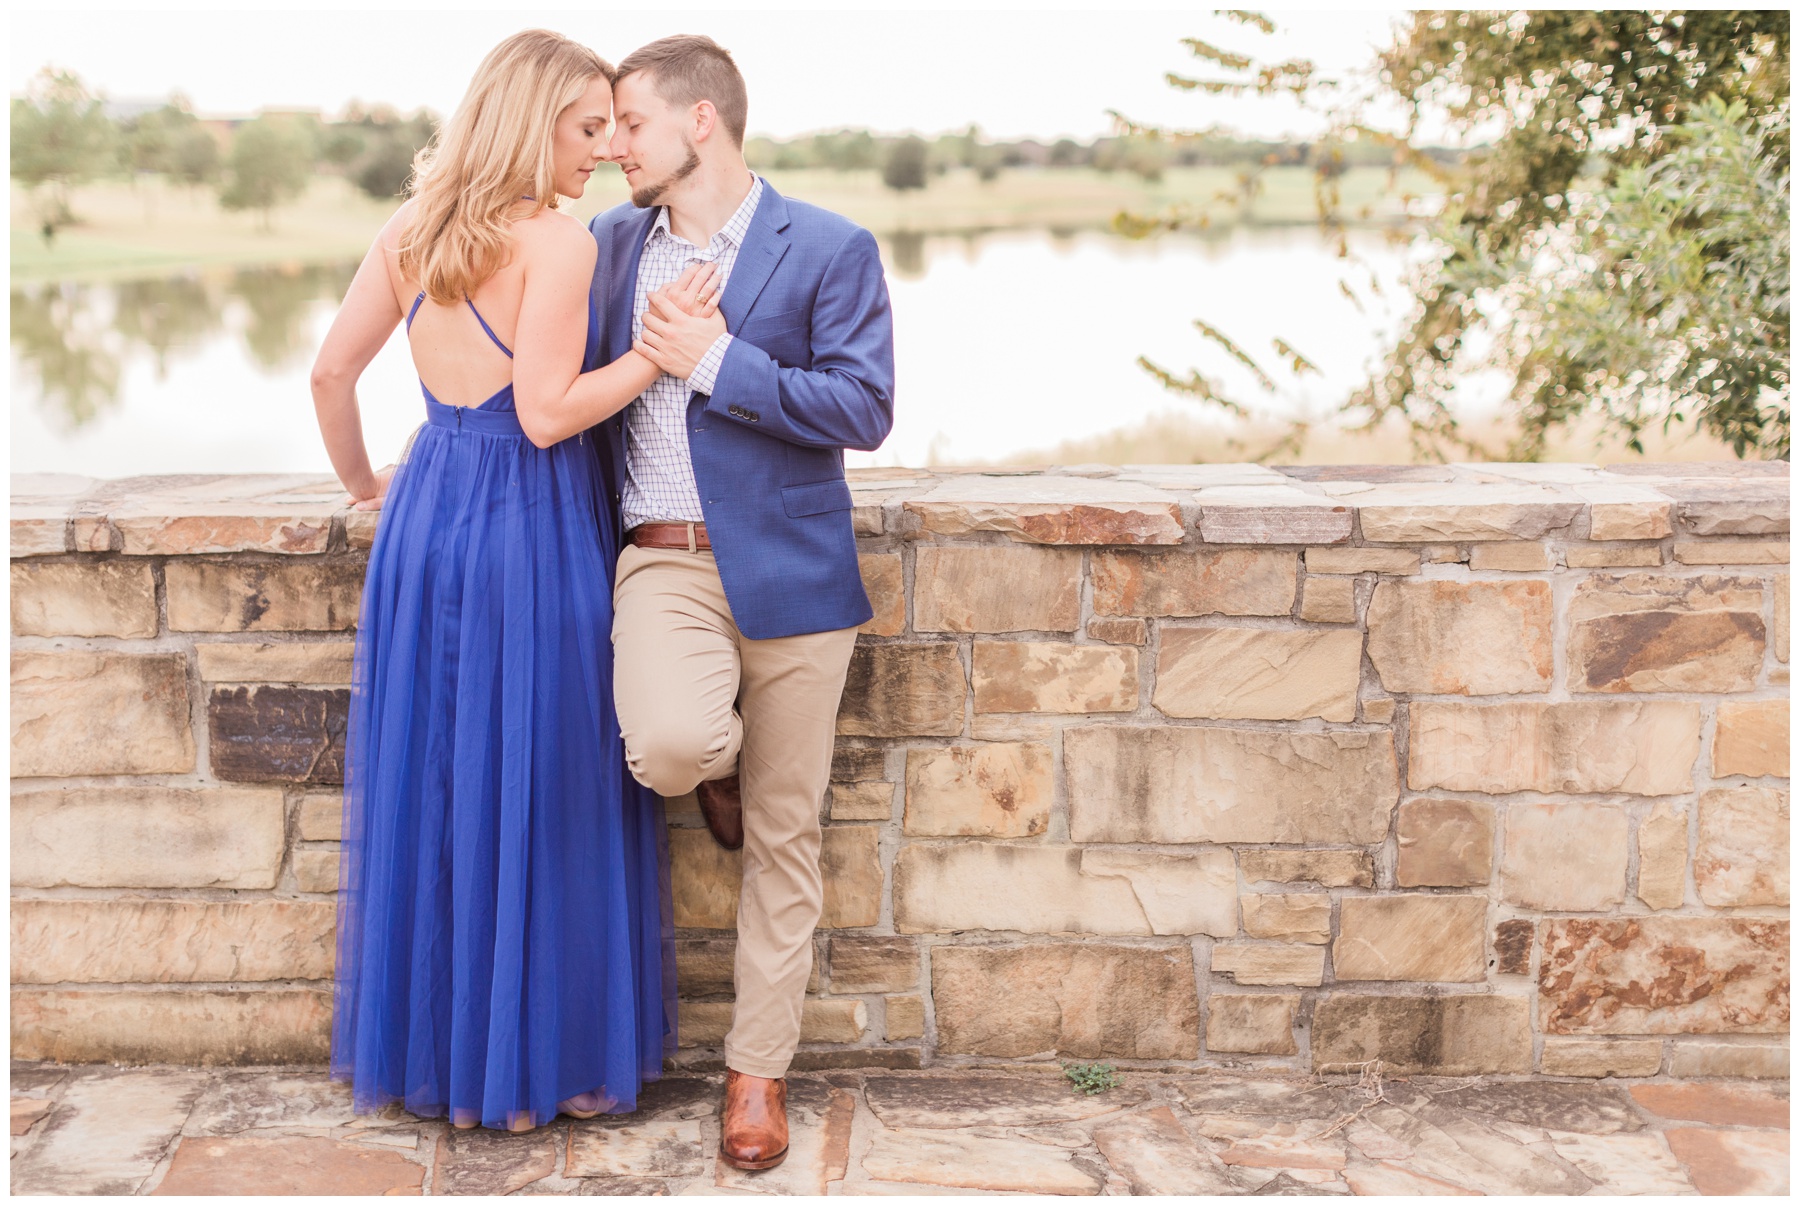 Meghan and Jake’s lakeside engagement session